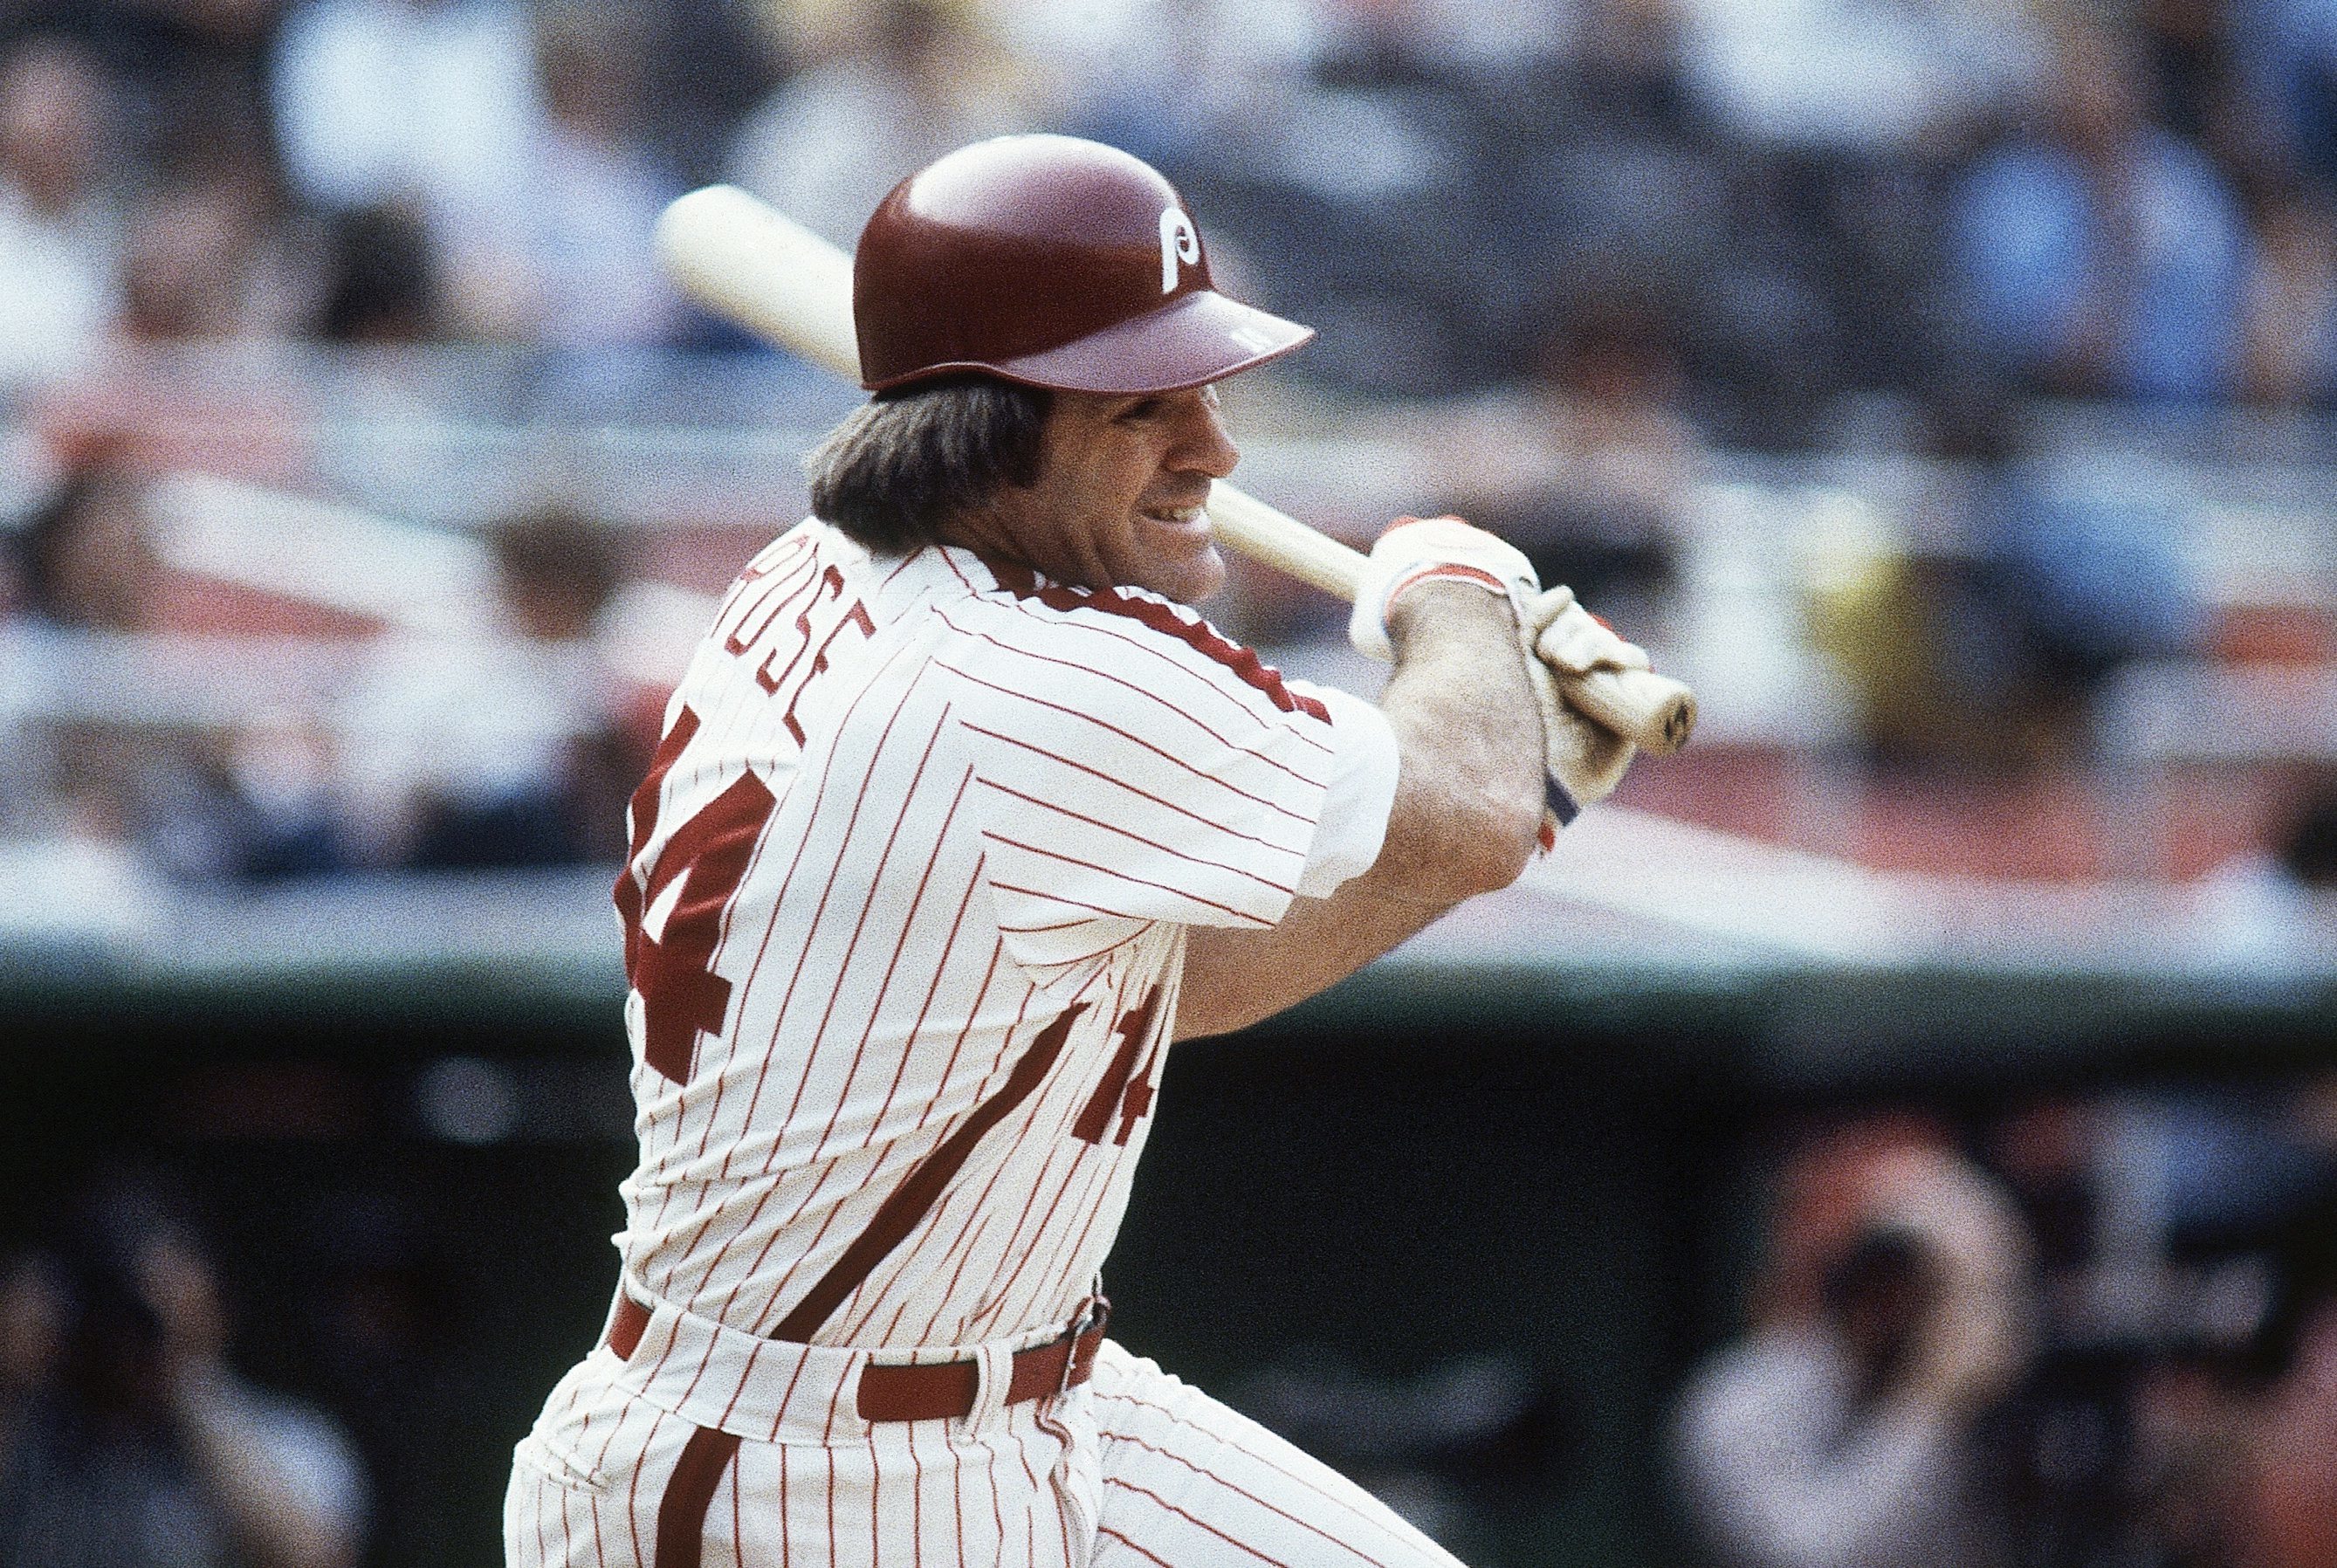 Phillies vs. Royals: Reflecting on the 1980 World Series